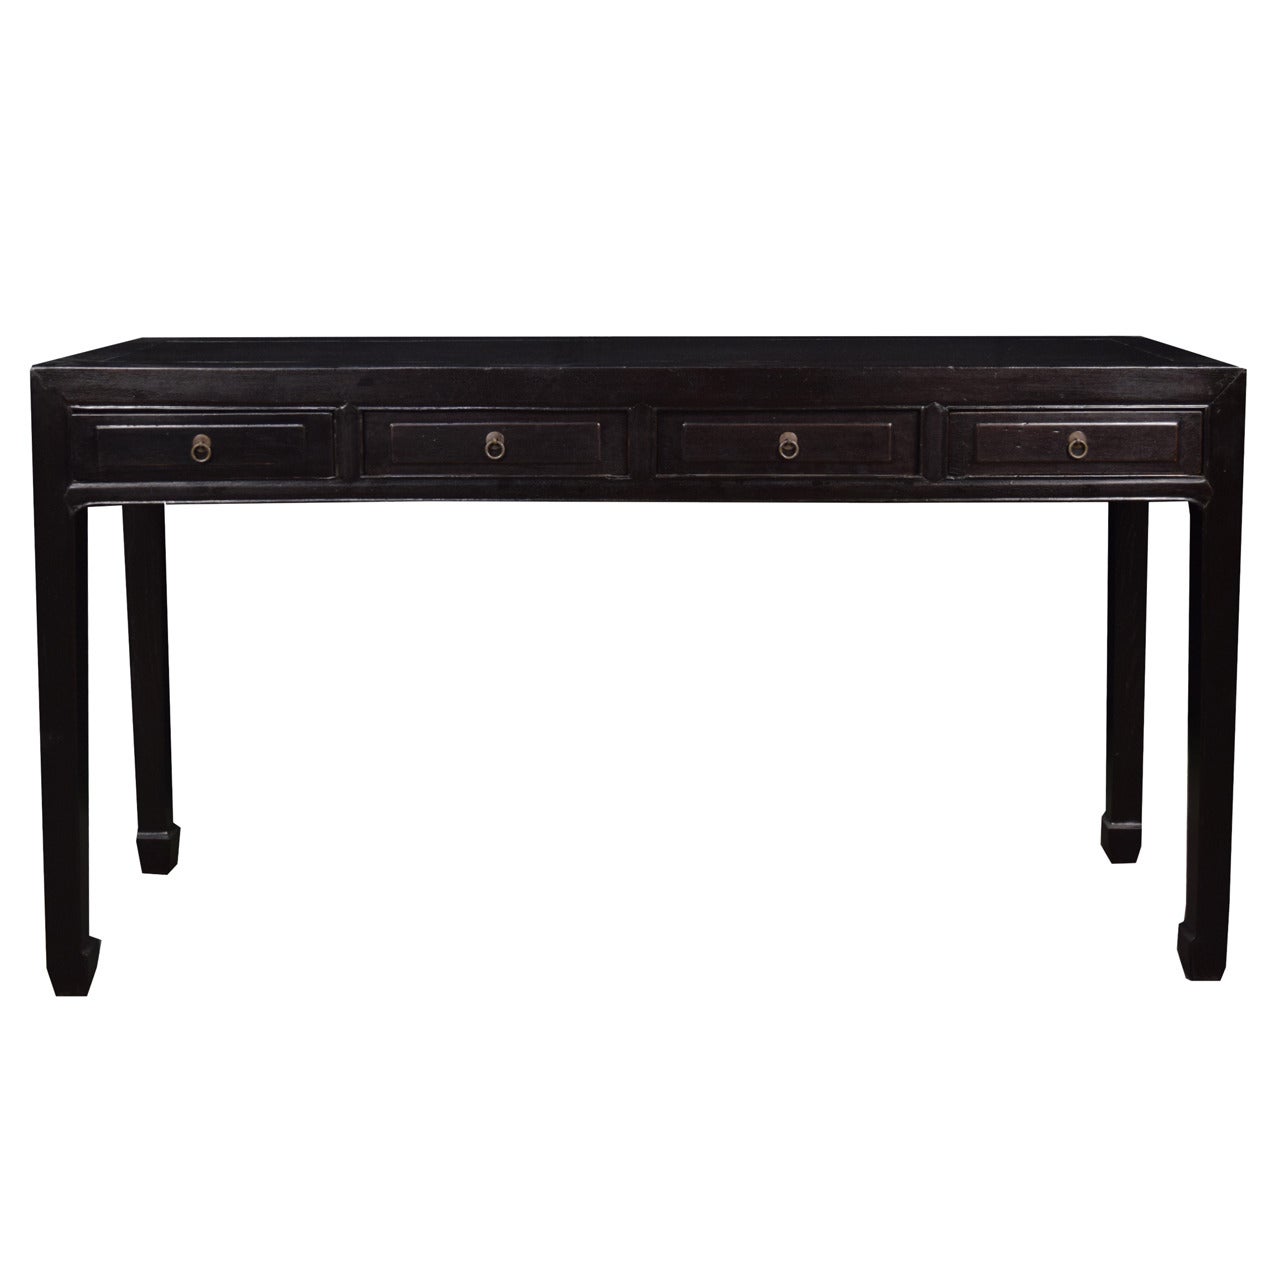 19th Century Chinese Four-Drawer Shallow Table with Hoof Feet